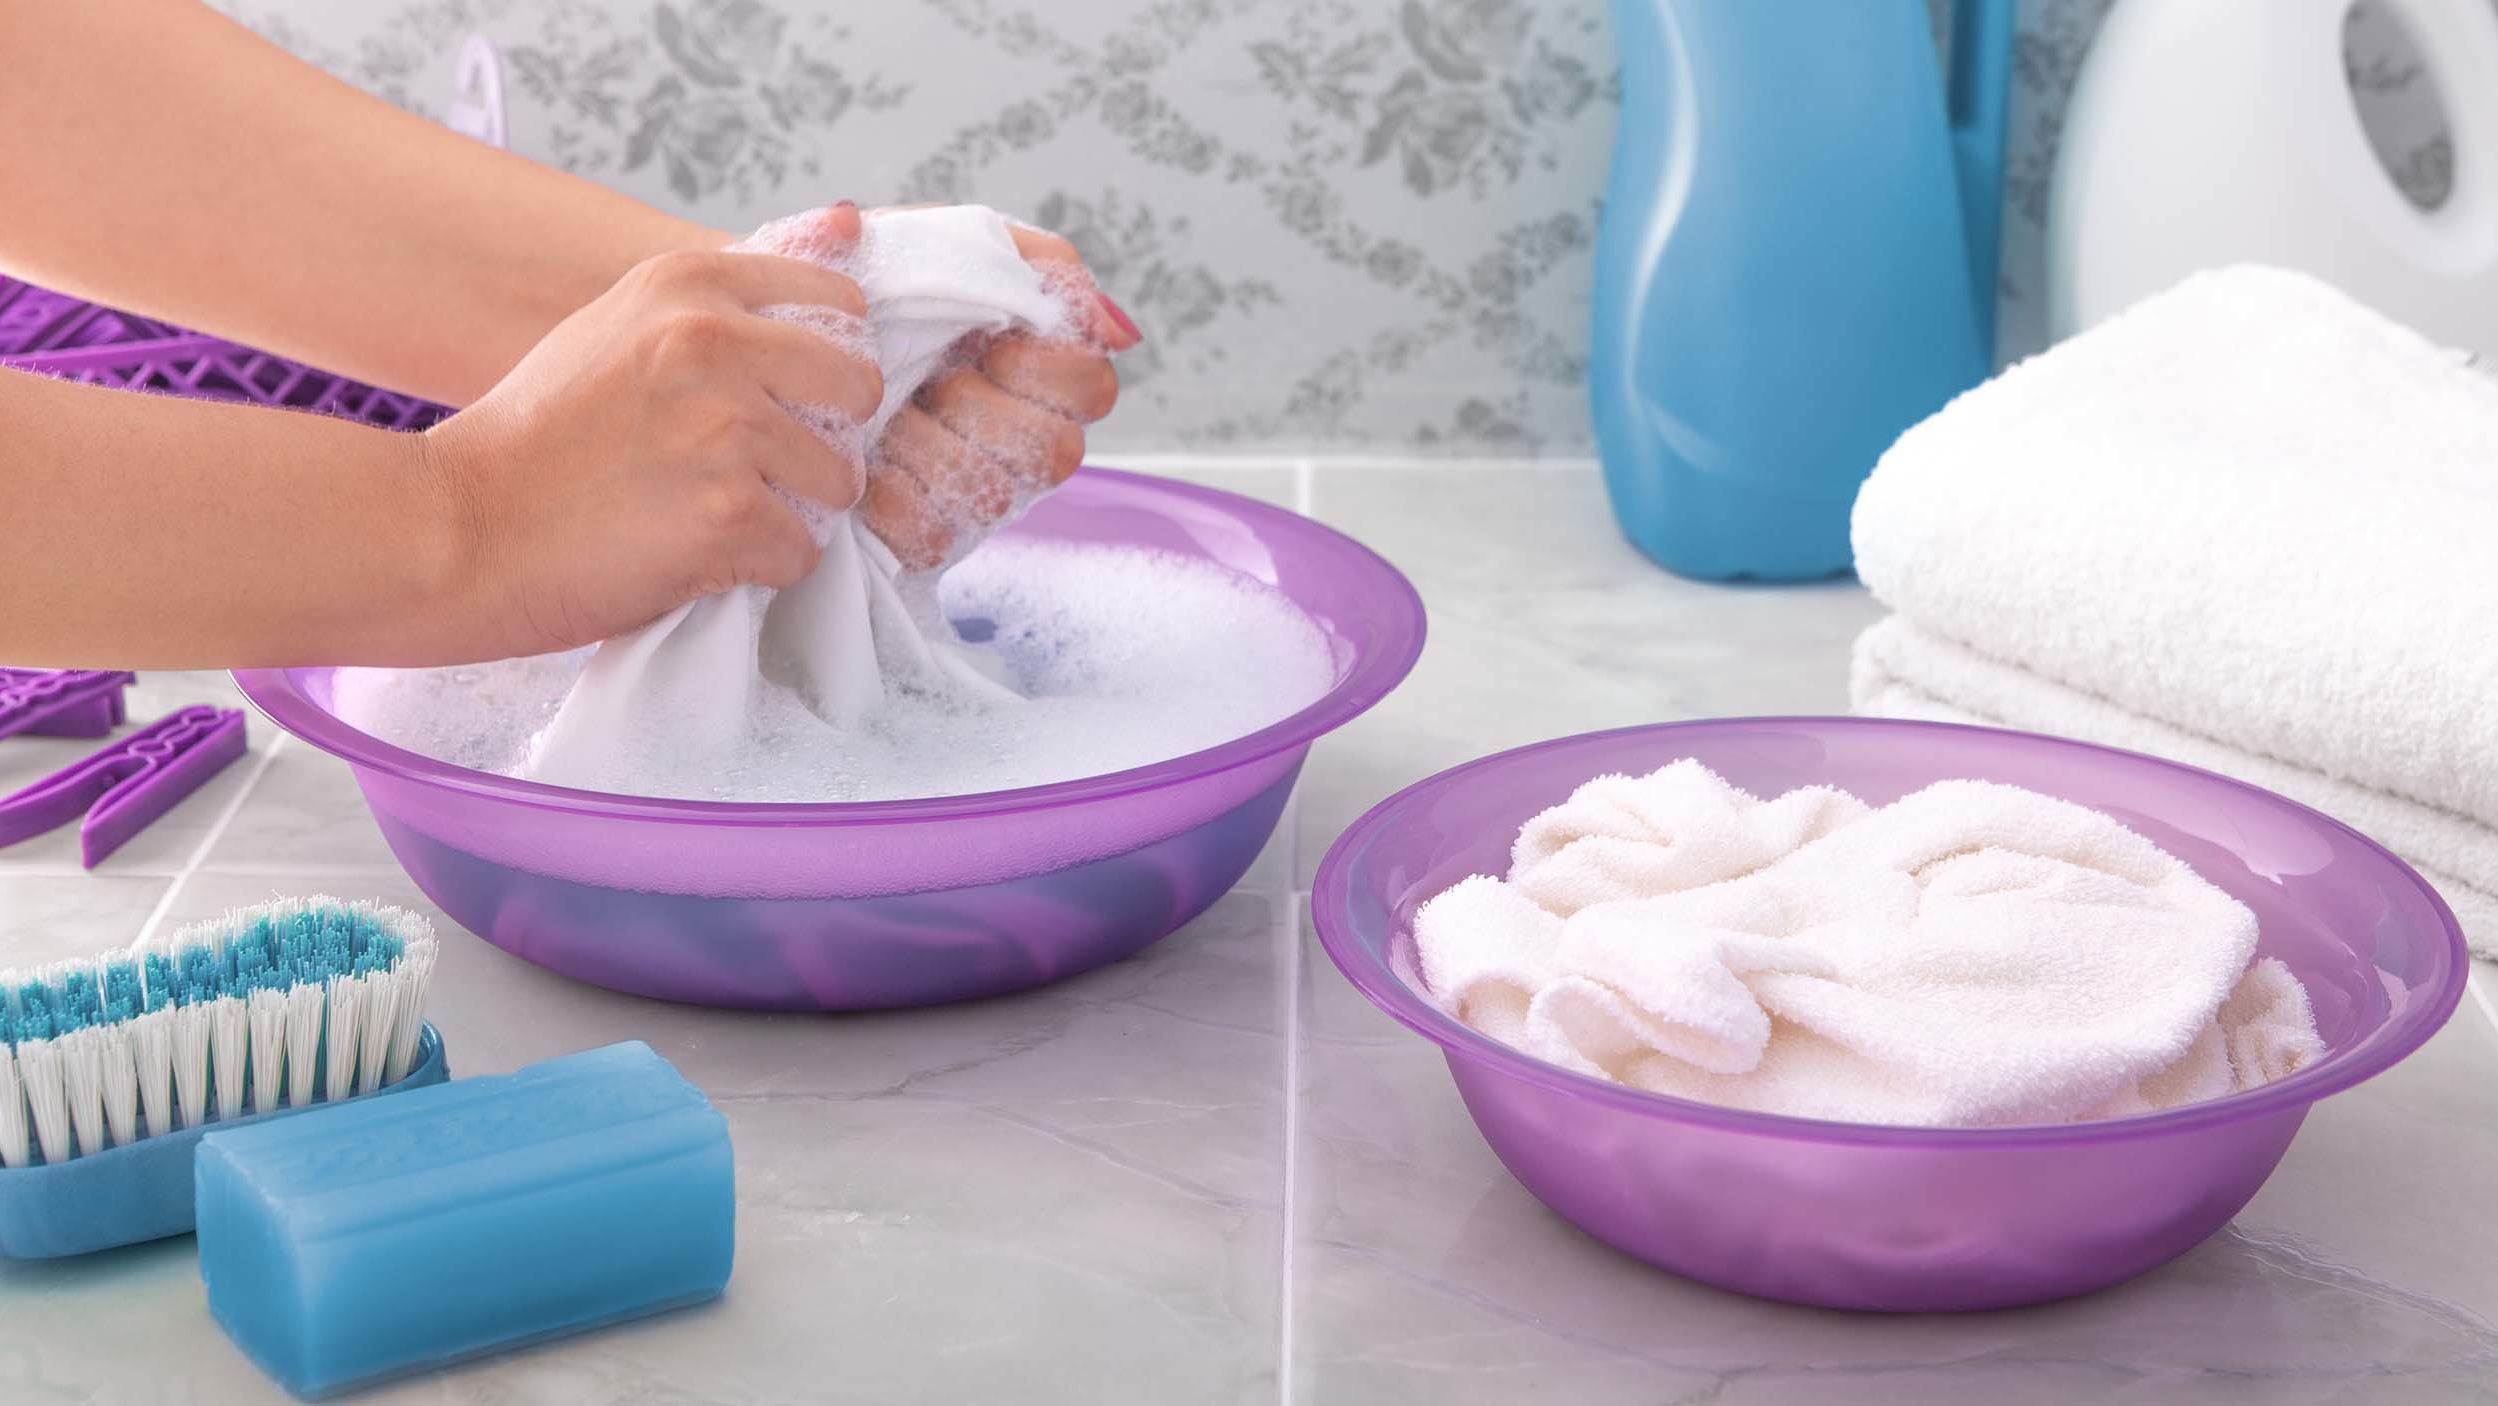 How to wash clothes by hand – hand wash underwear, sweaty clothes and more